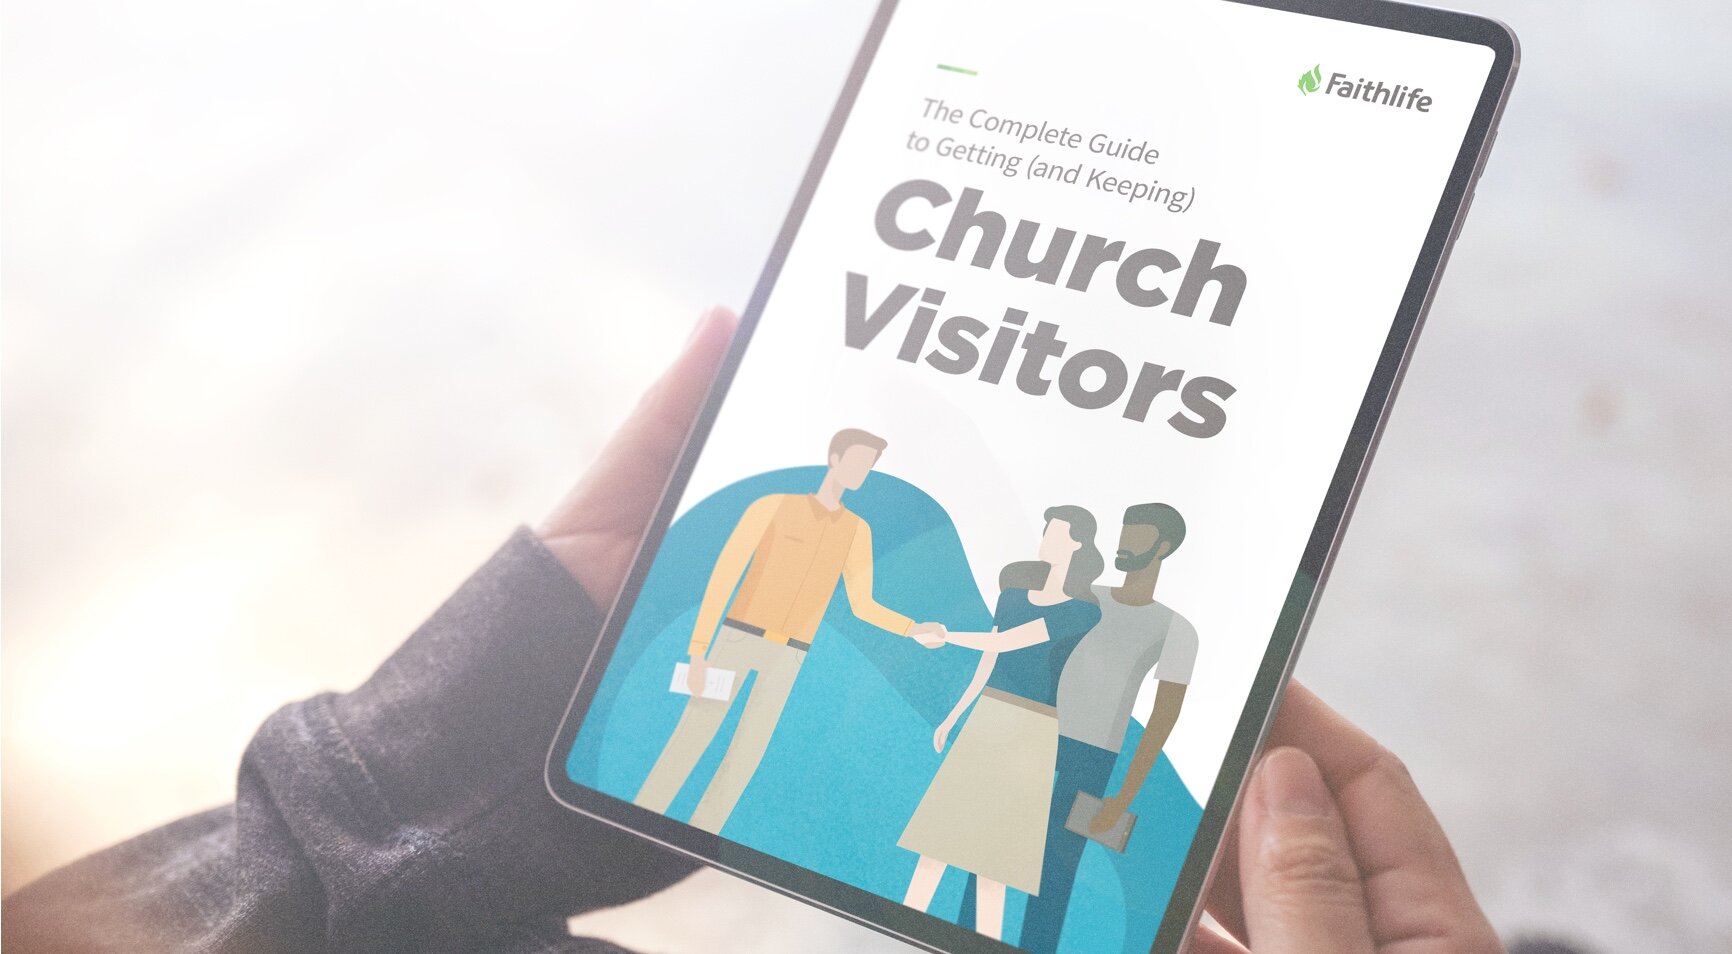 The Complete Guide to Getting (and Keeping) Church Visitors